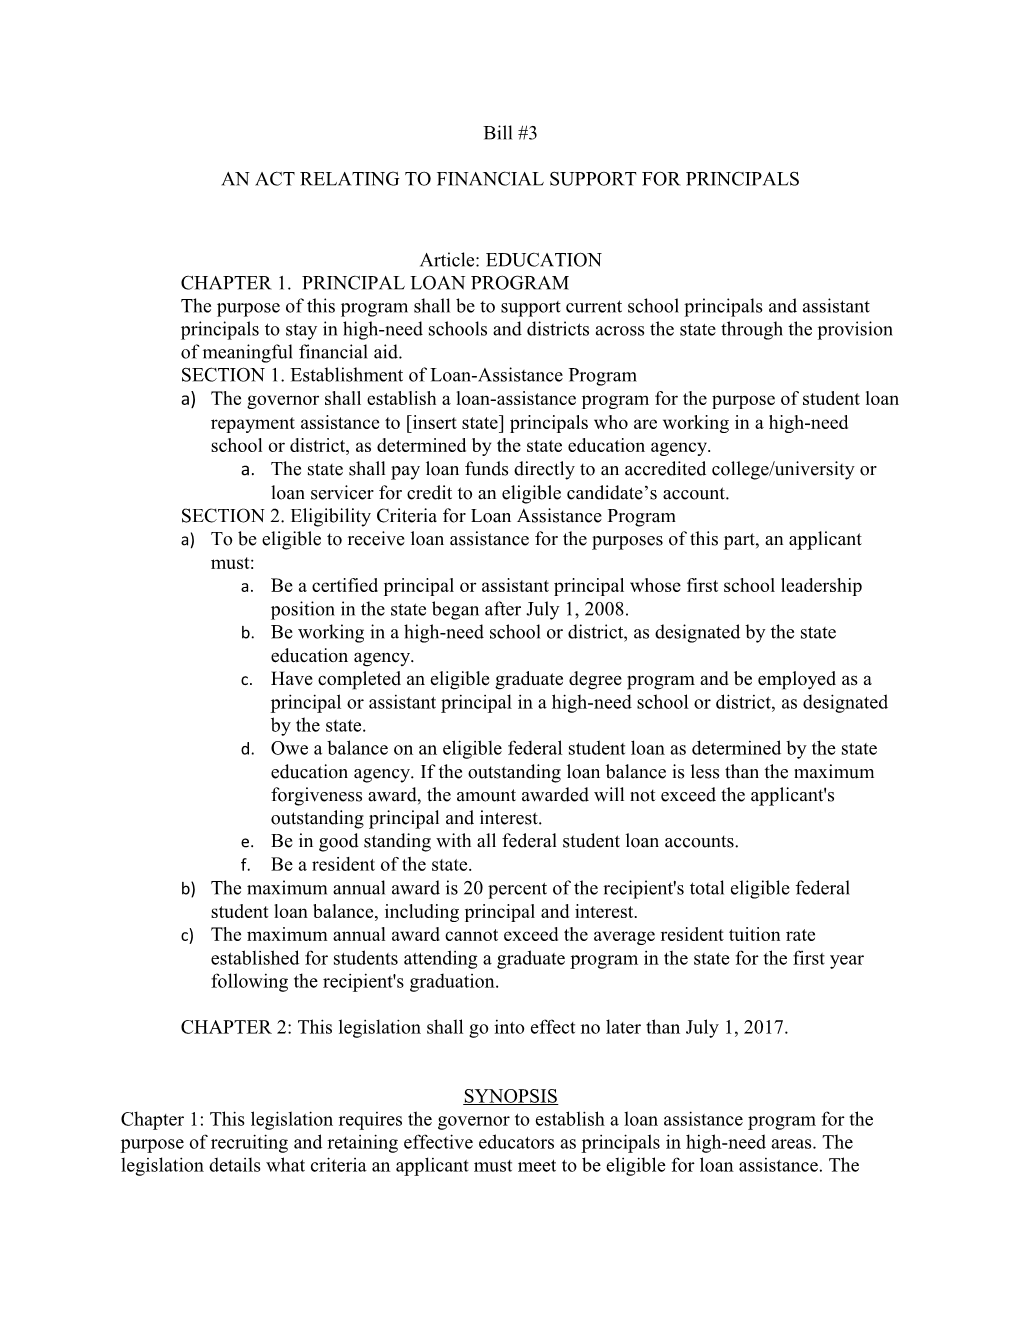 An Act Relating to Financial Support for Principals